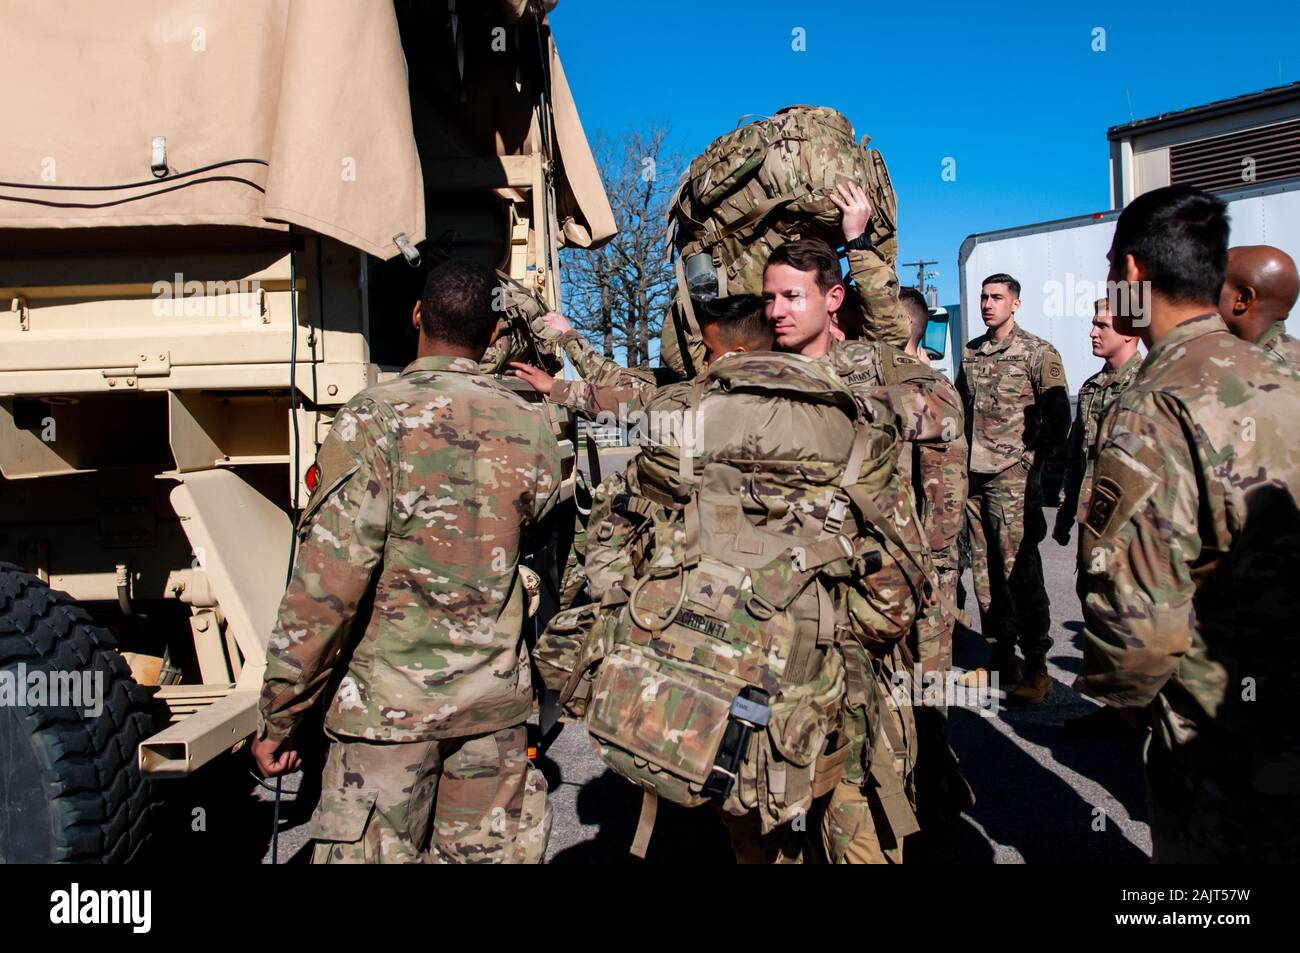 Pope Army Airfield, NC, USA. 5th Jan, 2020. Jan. 5, 2020 - POPE ARMY AIRFIELD, N.C., USA - U.S. Army paratroopers from the 1st Brigade Combat Team, 82nd Airborne Division, continue their deployment from Pope Army Airfield, North Carolina. The 'All American Division'' Immediate Response Force (IRF), based at Fort Bragg, N.C., mobilized for deployment to the U.S. Central Command area of operations in response to increased threat levels against U.S. personnel and facilities in the area. Today's deployment follows the Jan. 1 deployment of a division infantry battalion; the Jan. 2 U.S. drone Stock Photo